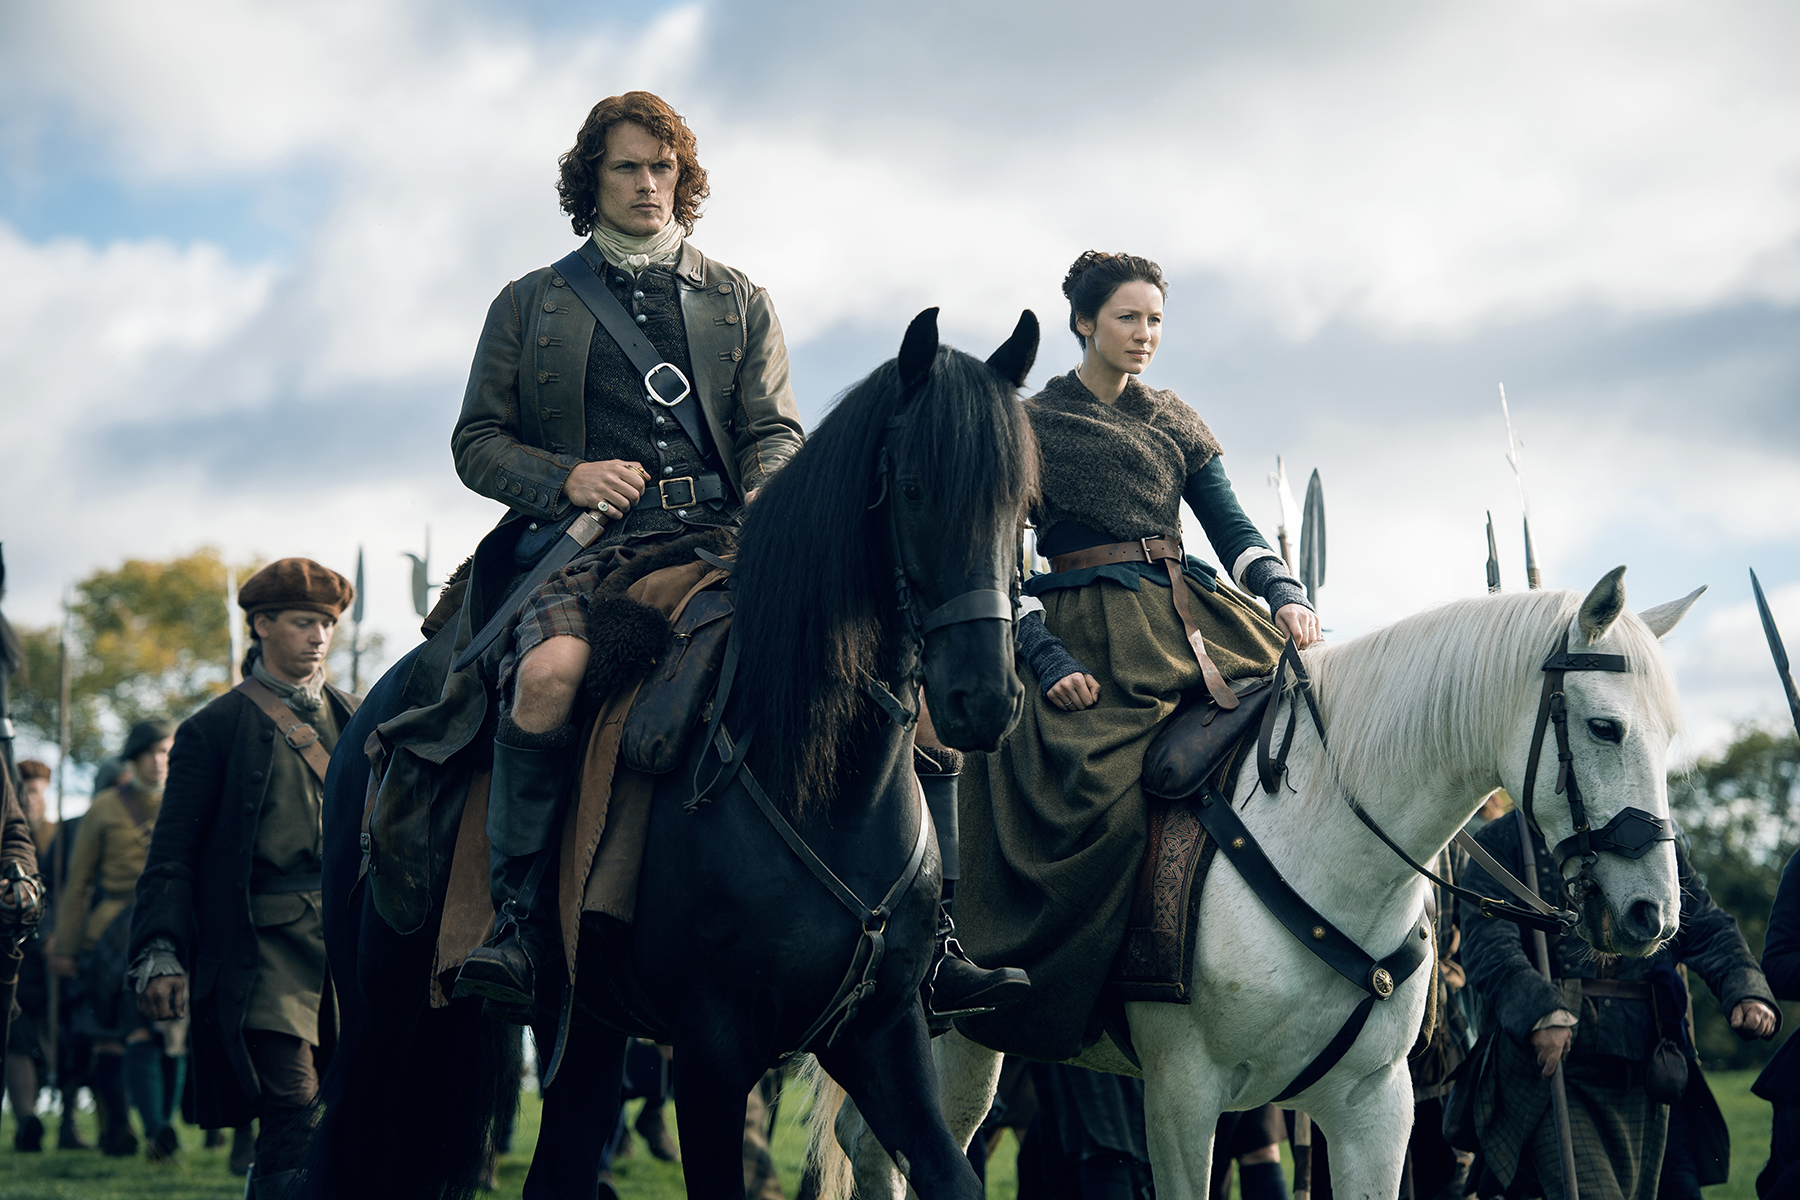 Claire and Jamie astride beautiful horses, in front of the Fraser army. They are throwing off Power Couple vibes form here to the Moon.